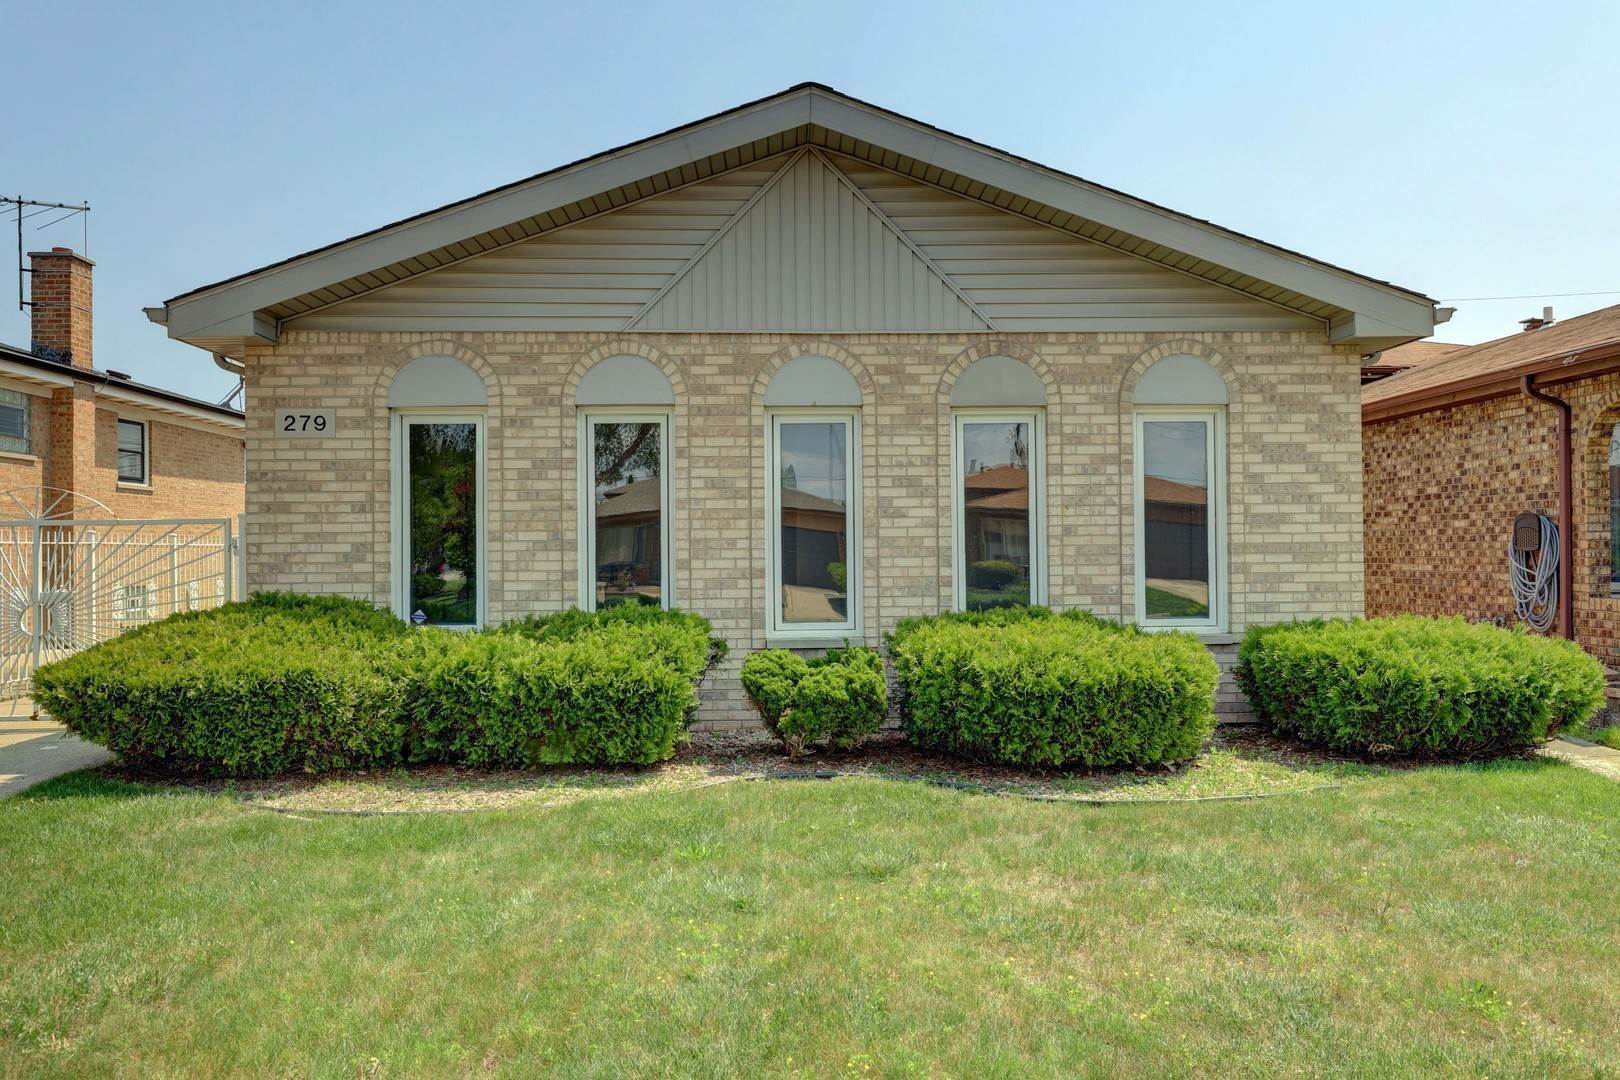 Single Family for Sale at Calumet City, IL 60409